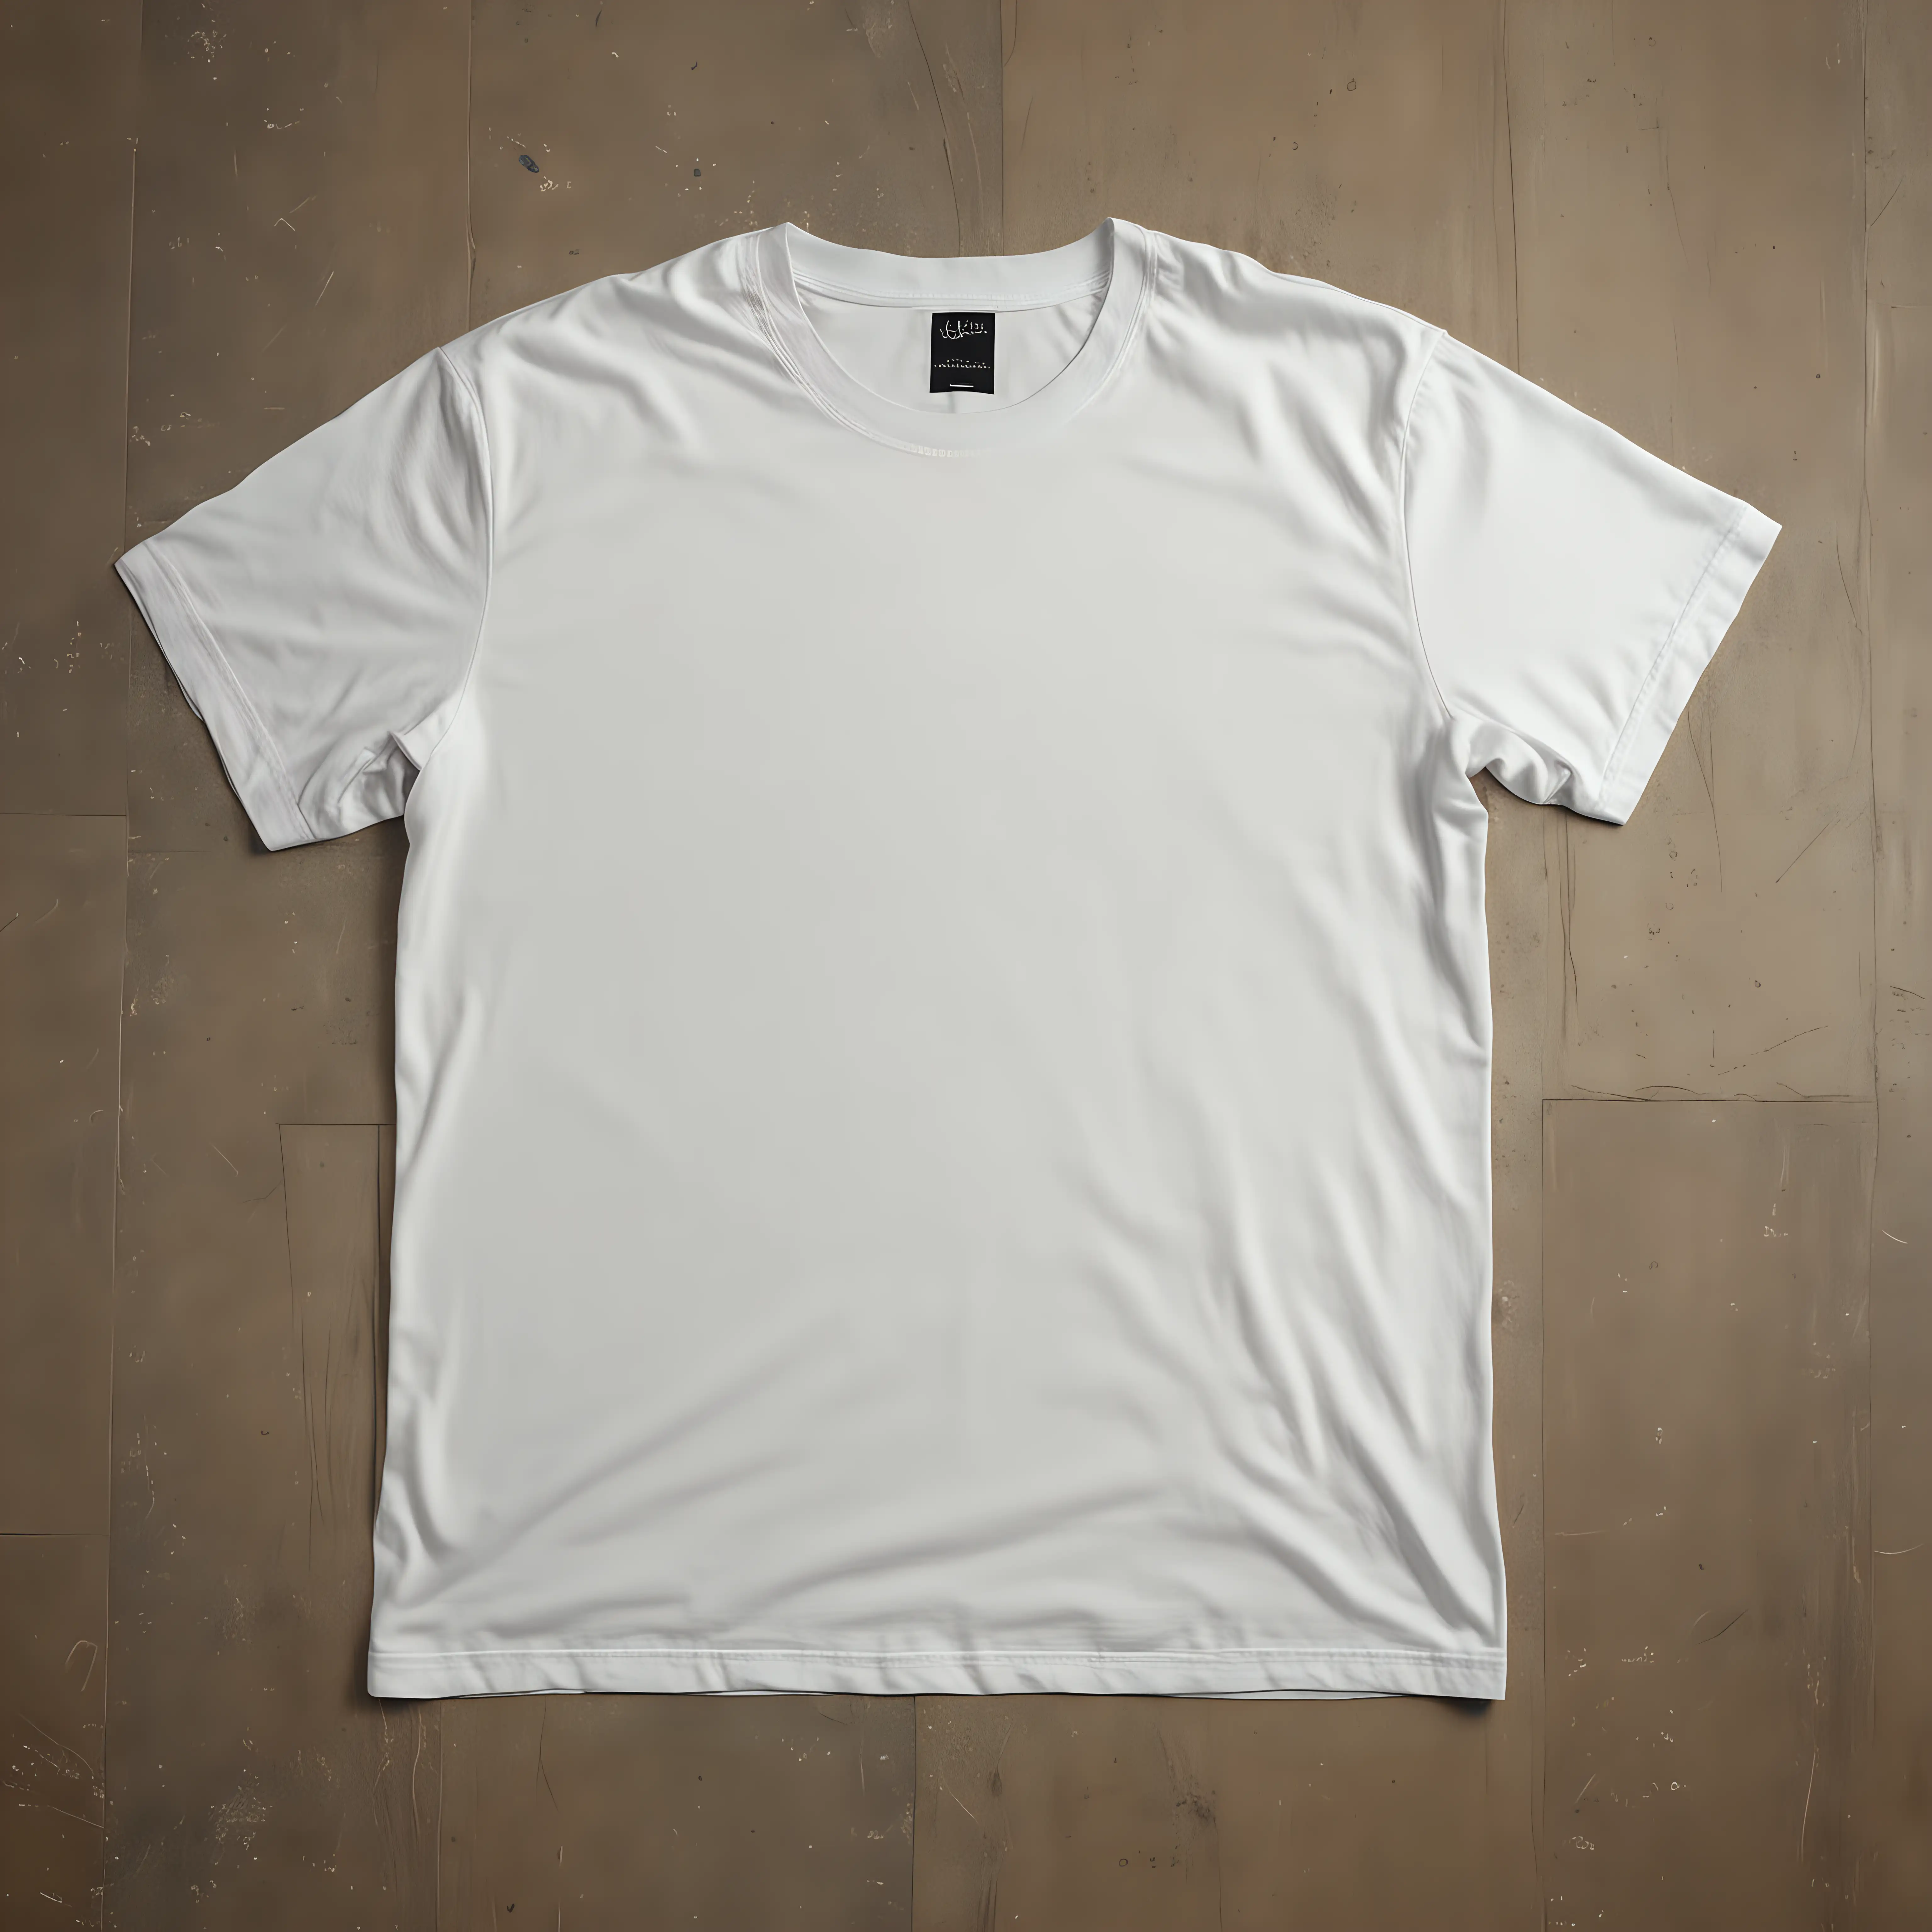 HYPER REALISTIC textured ironed simmetrical proportional 100% cotton bella canvas 3001 white tshirt no wrinkles, lied on floor seen from above with solid contrasting background floor